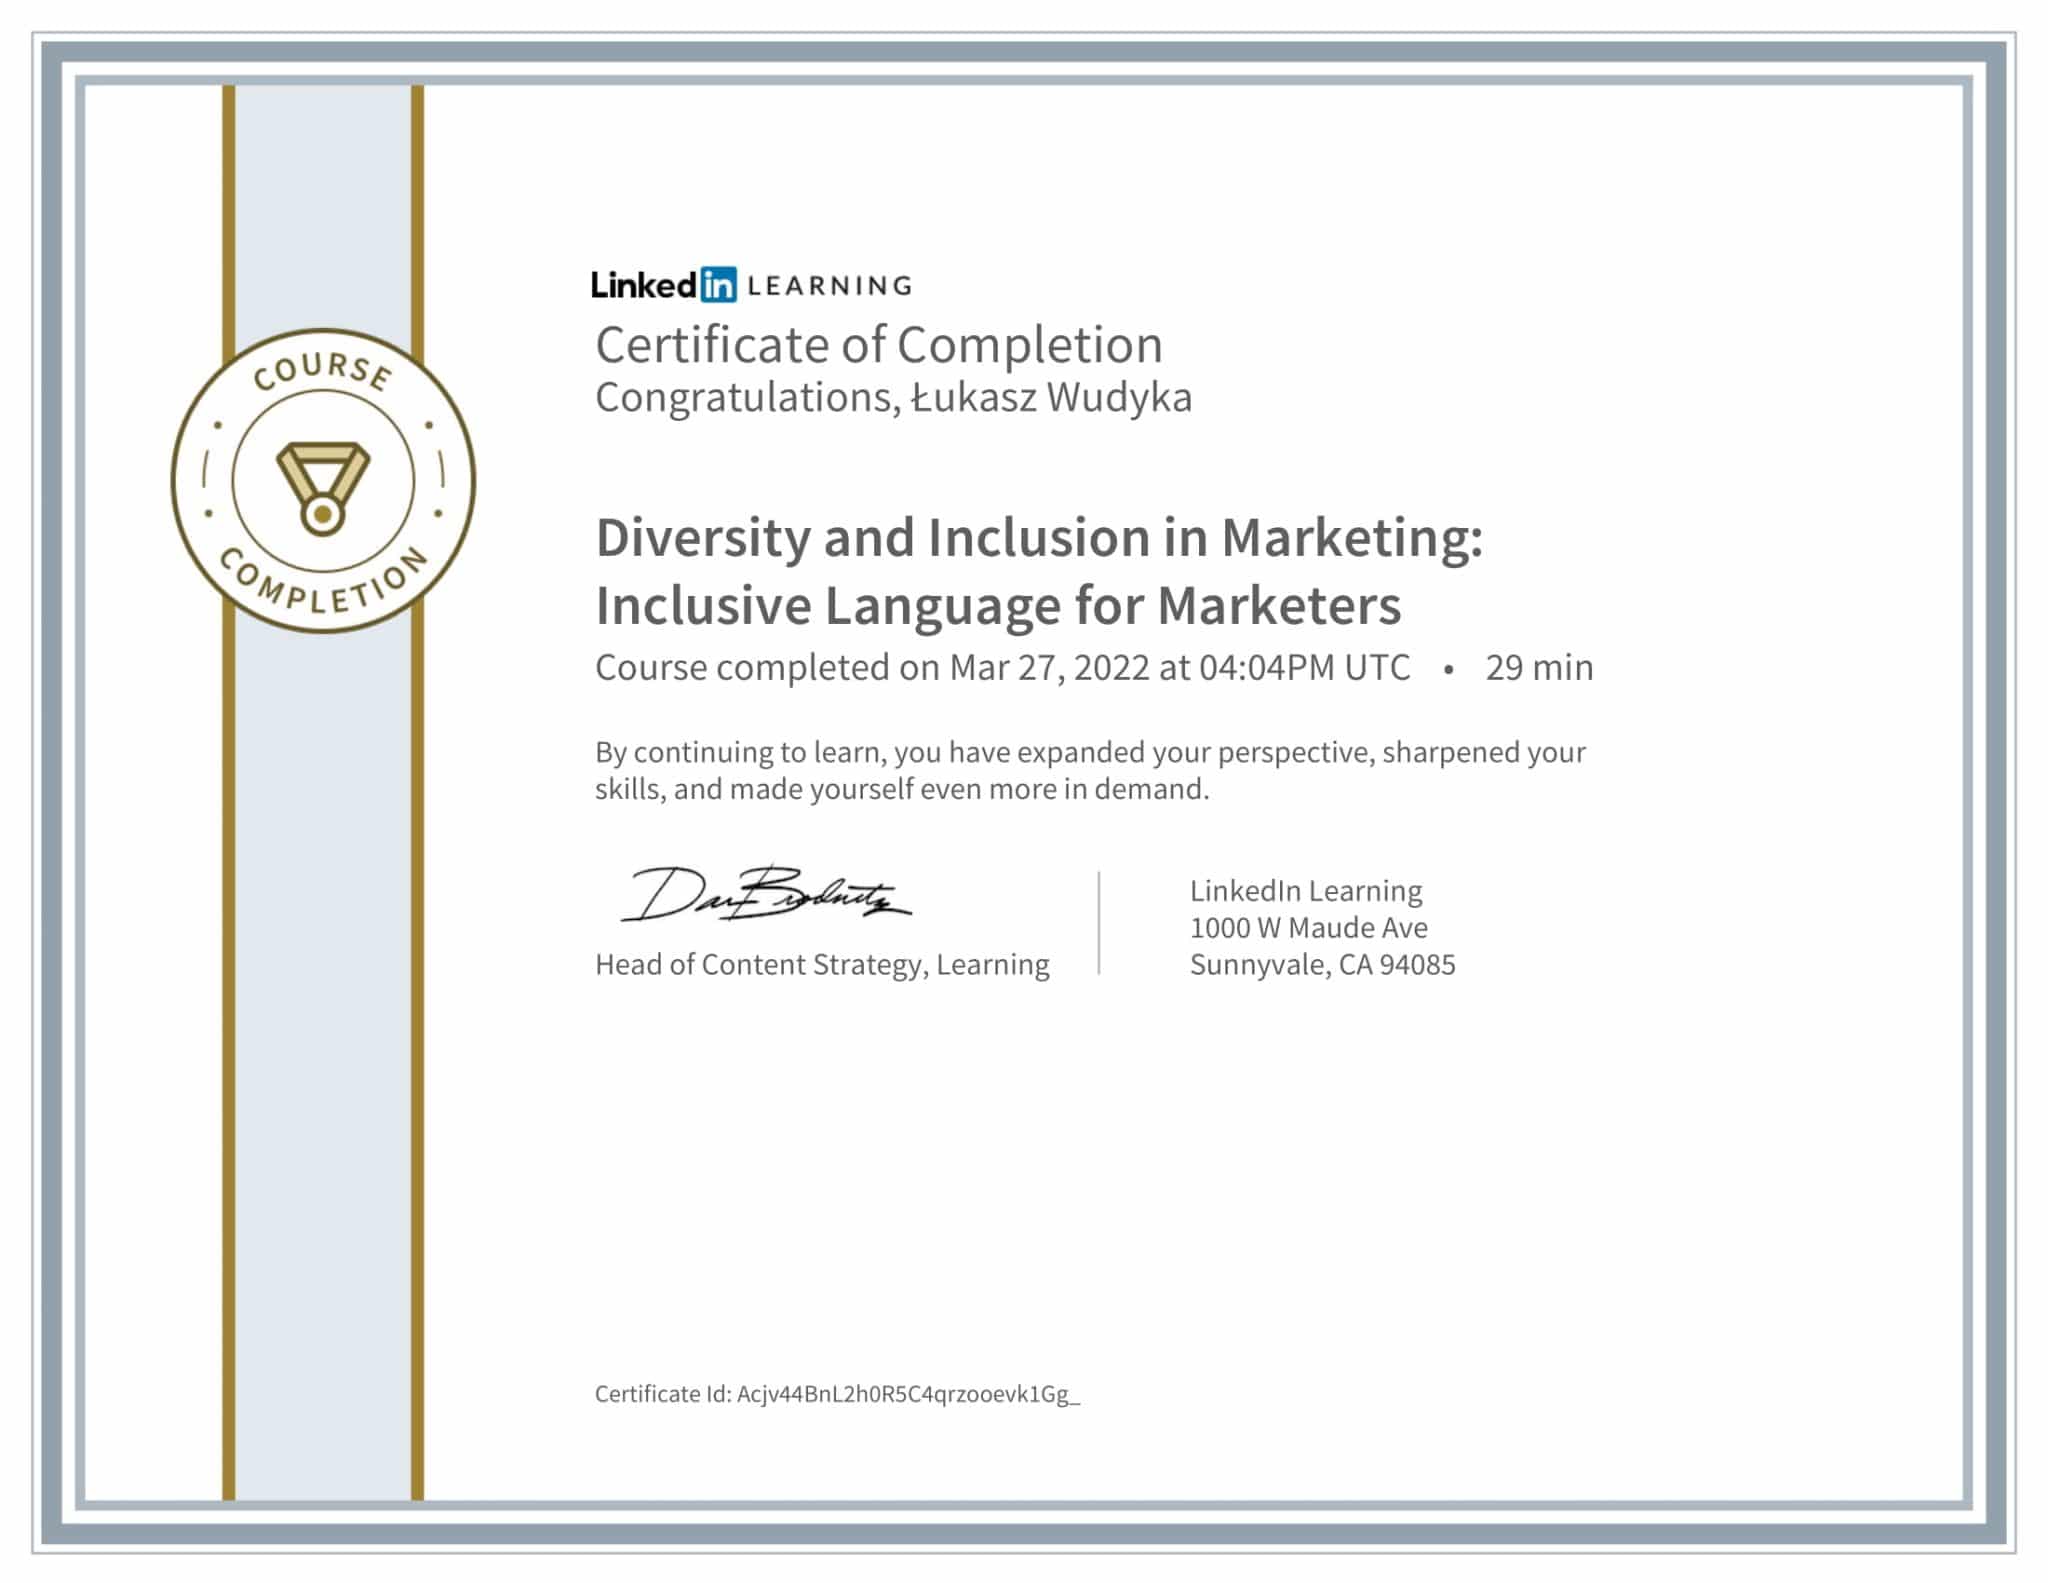 CertificateOfCompletion_Diversity and Inclusion in Marketing Inclusive Language for Marketers-1